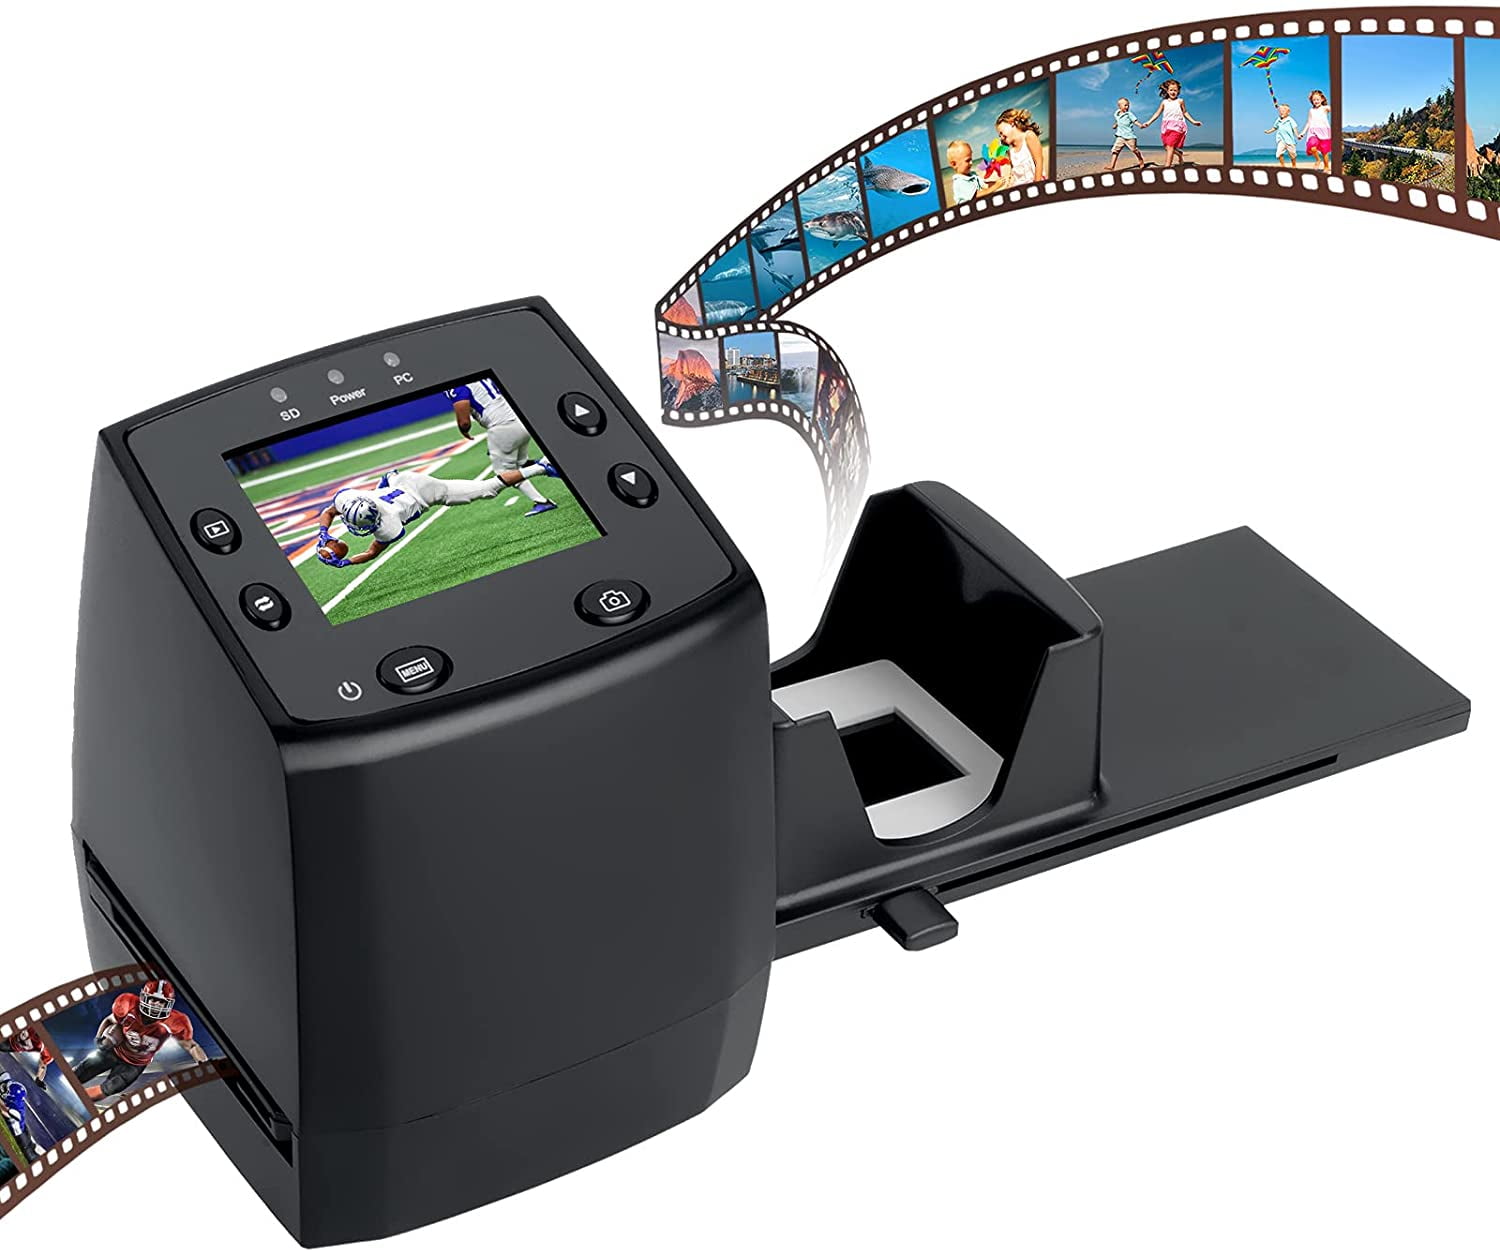 DIGITNOW High resolution film scanner convert 35/135mmNegative&Slide to  Digital JPEGs and saved to SD card, Using Built-In Software Interpolation  with 1800DPI High Resolution-5/10M Photo&Film Scanner-Film Scanner-DIGITNOW!